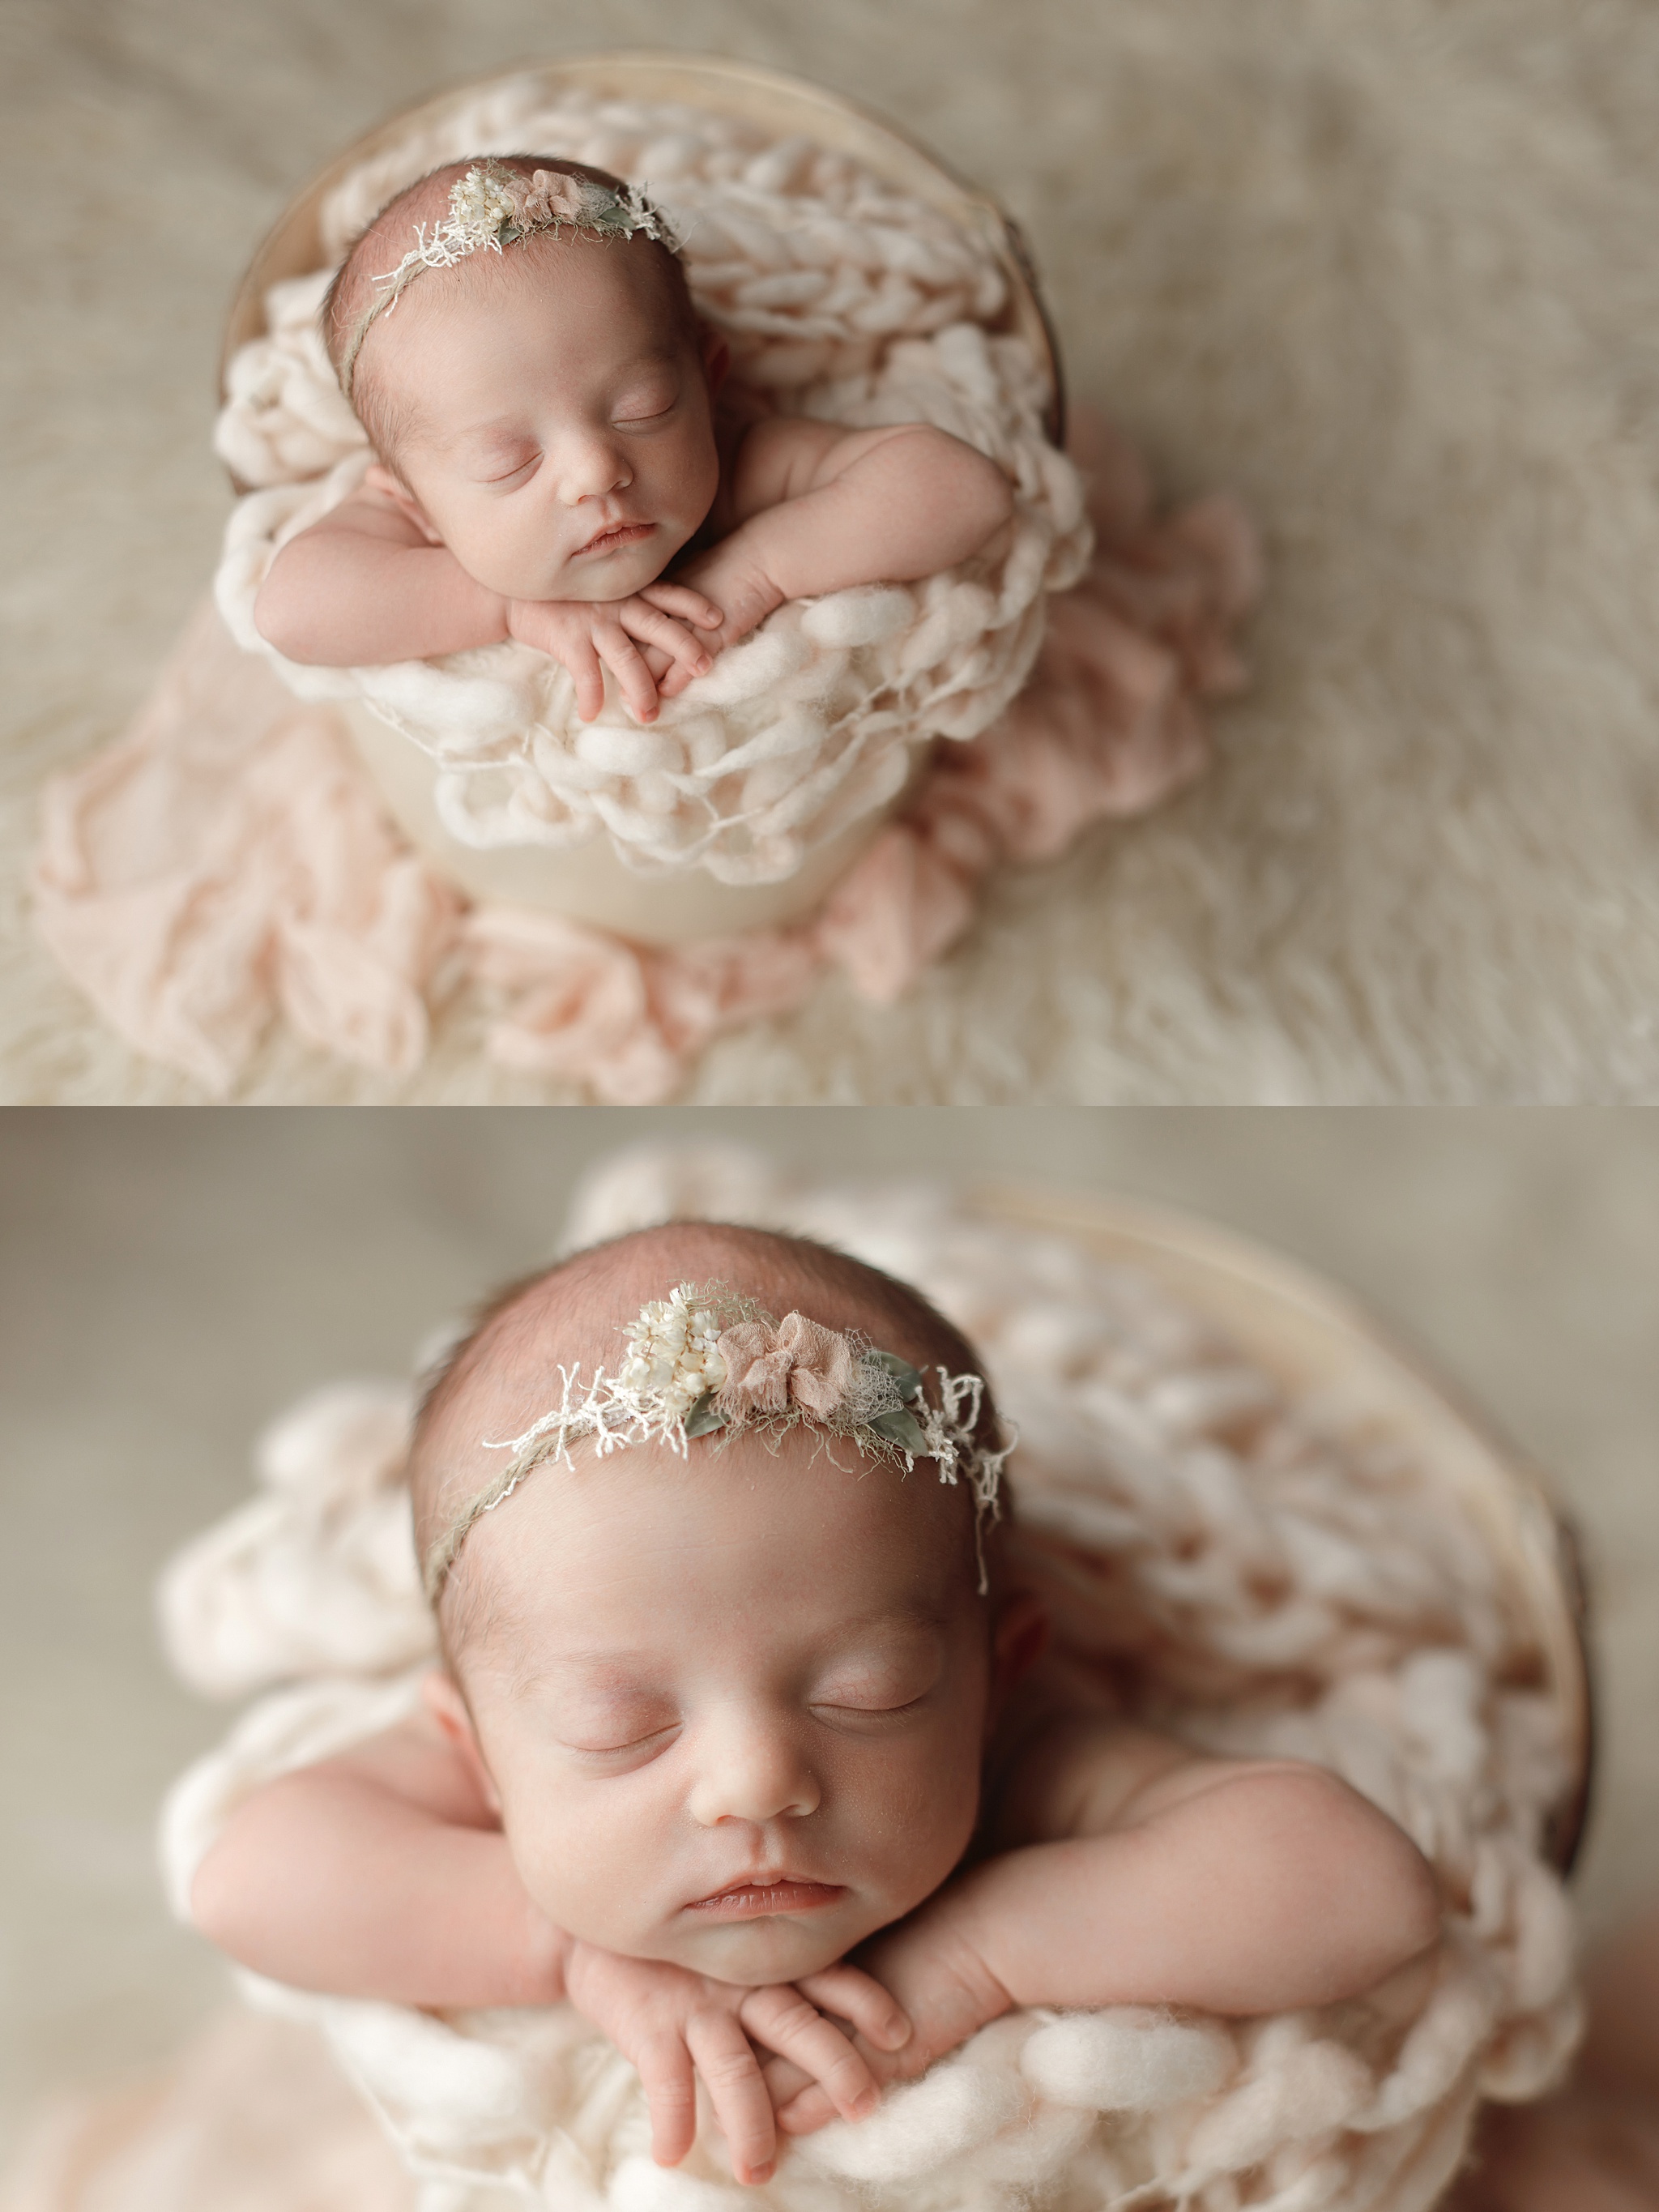 2022 Trend of Newborn Photography Ideas & Tips for Poses, Props & Settings  - abrittonphotography